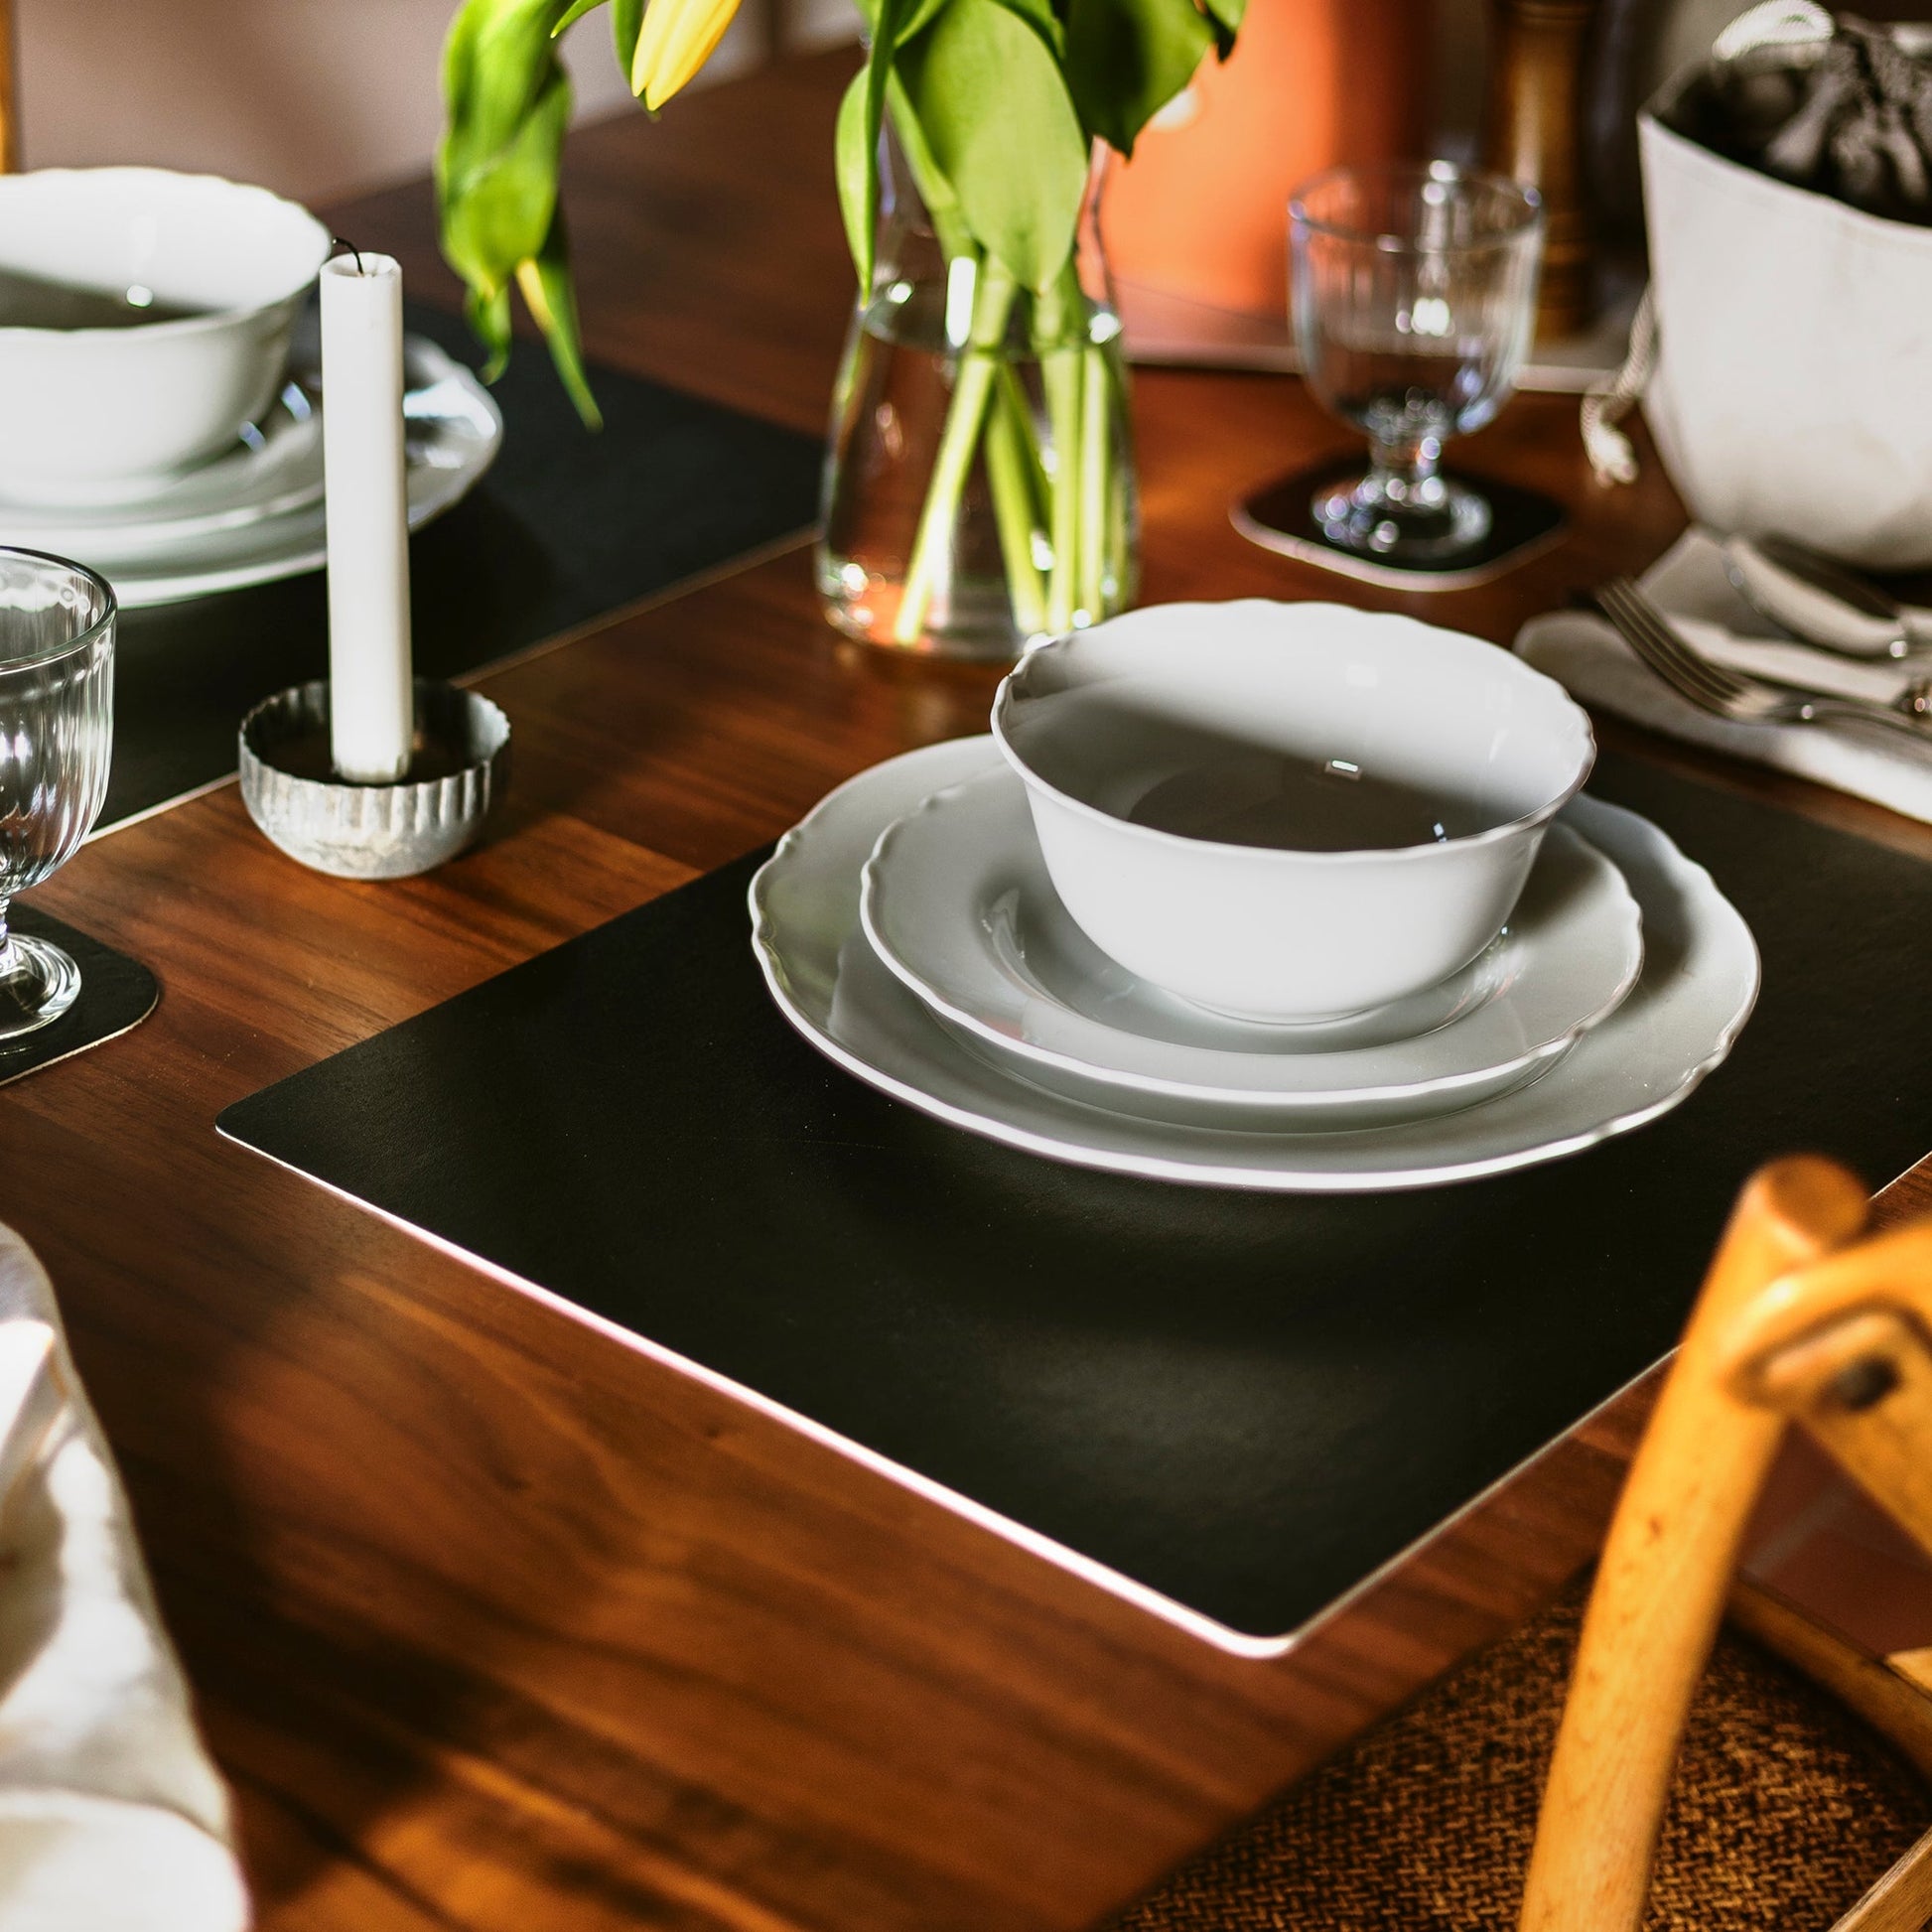 A black washable paper placemat is shown on a wooden table setting, underneath a stack of white ceramic plates and a bowl.